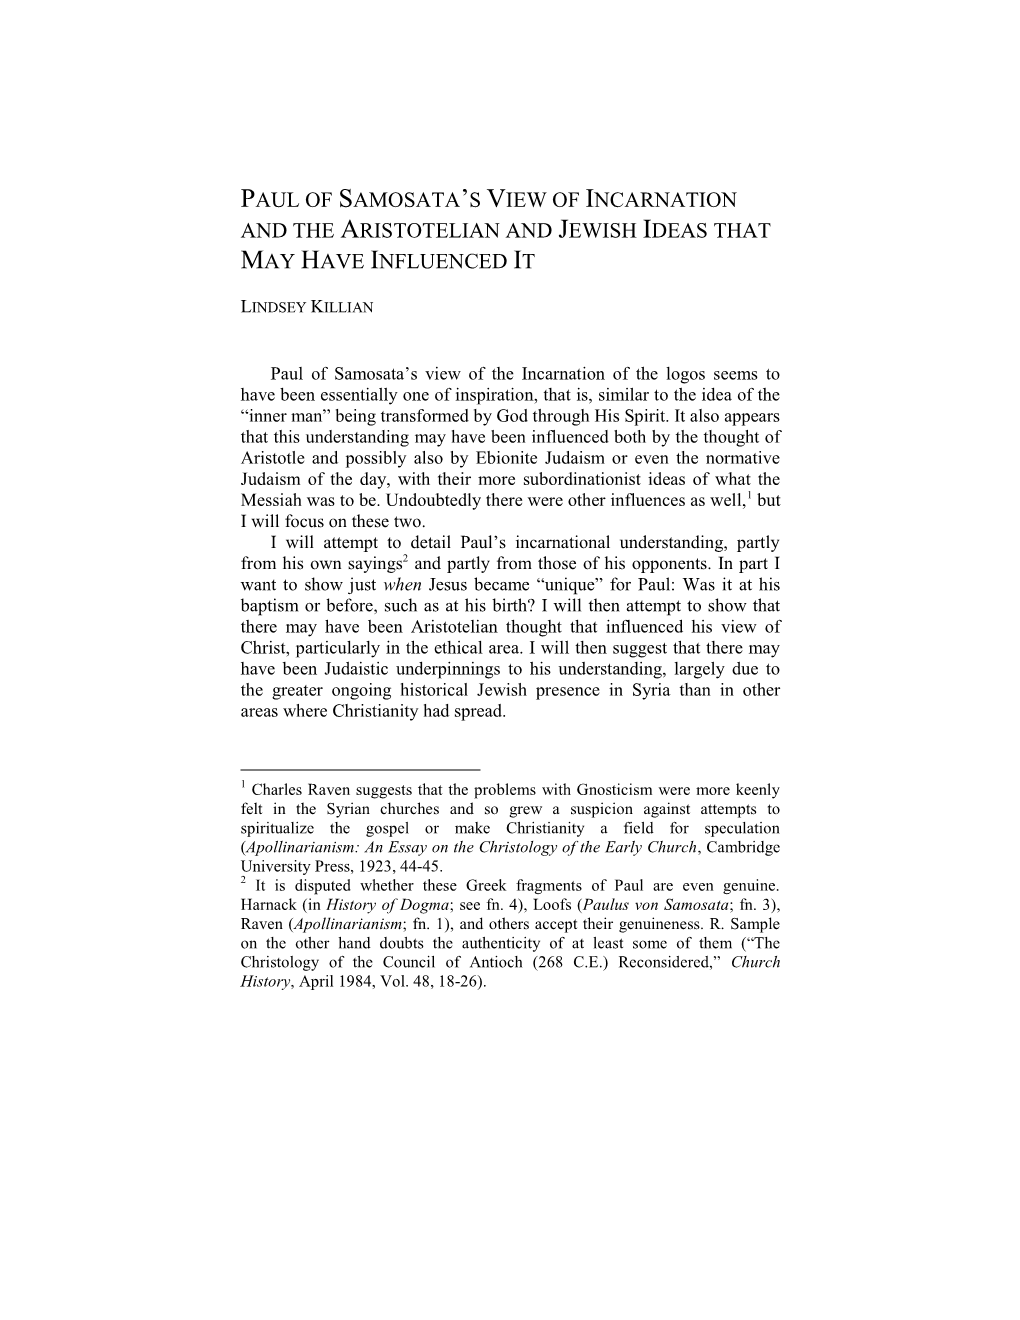 Paul of Samosata's View of Incarnation and The